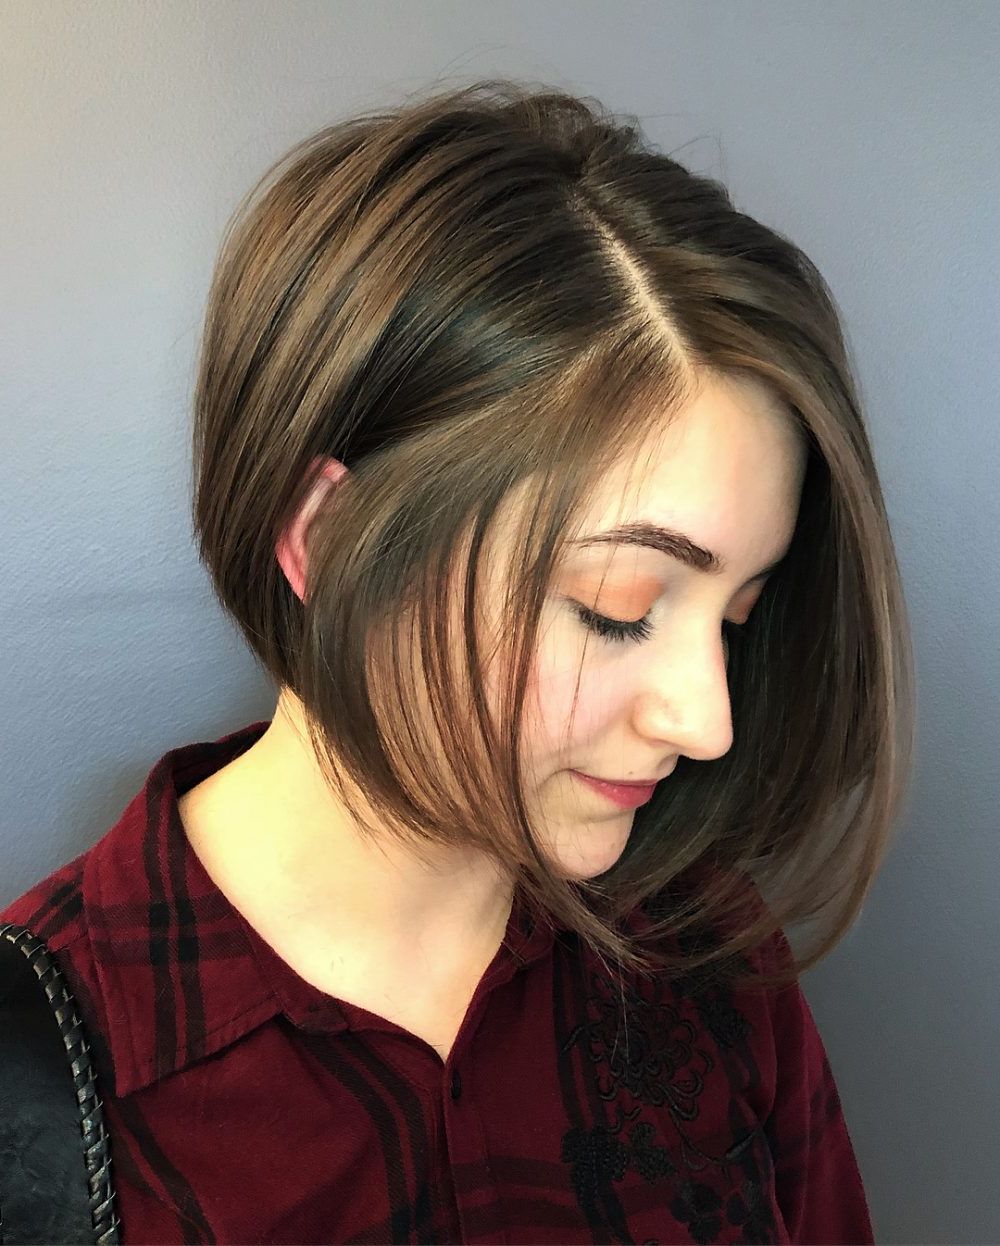 34 Most Flattering Short Hairstyles For Round Faces Throughout Short Bangs Hairstyles For Round Face Types (View 14 of 20)